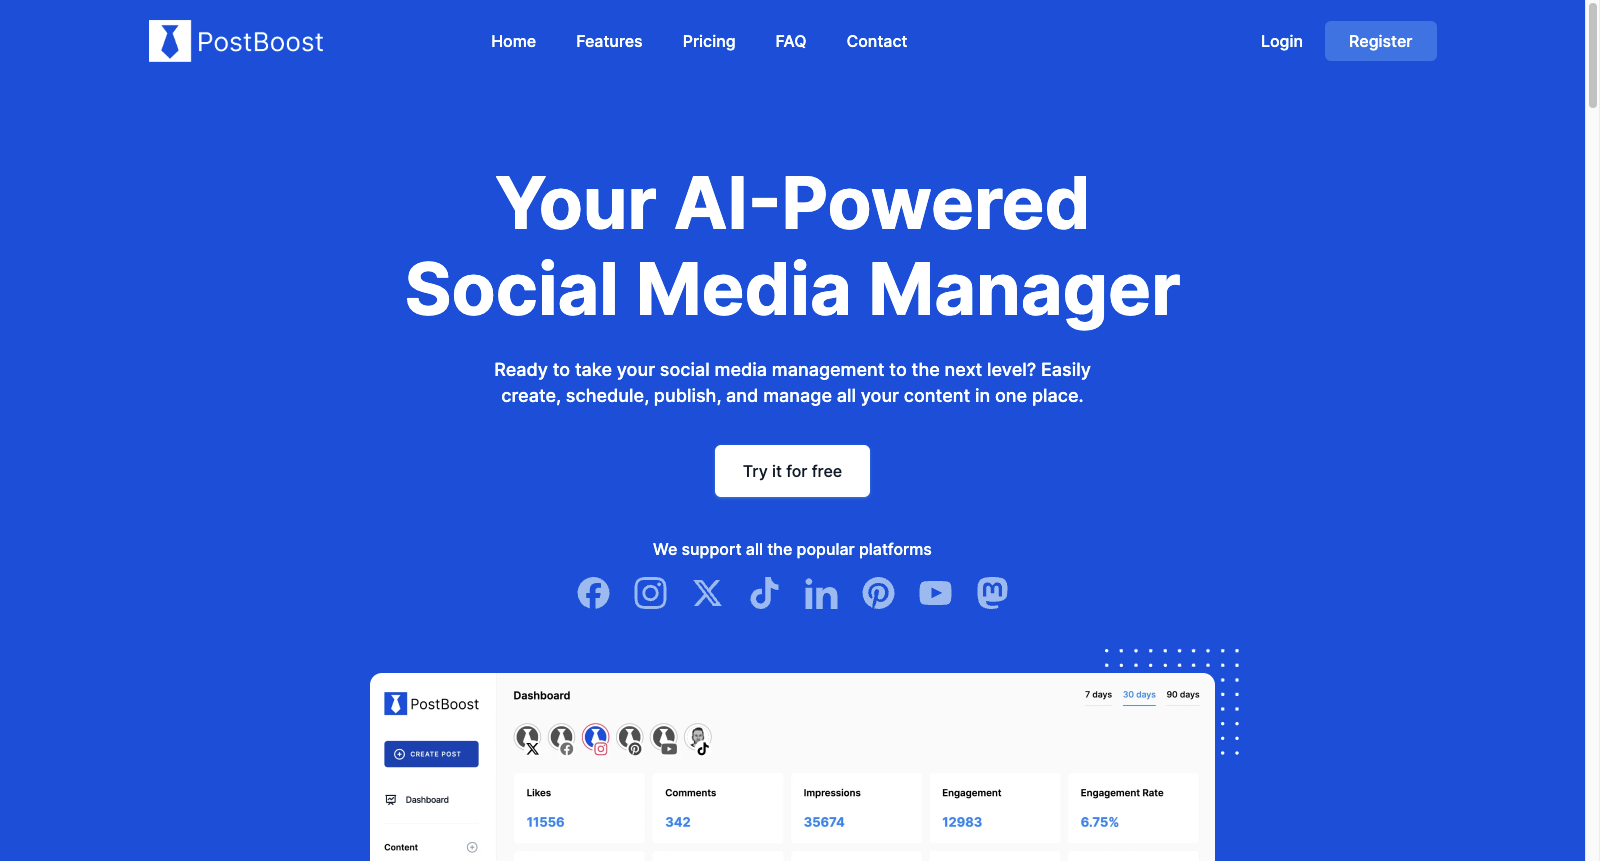 PostBoost | Your AI-Powered Social Media Manager